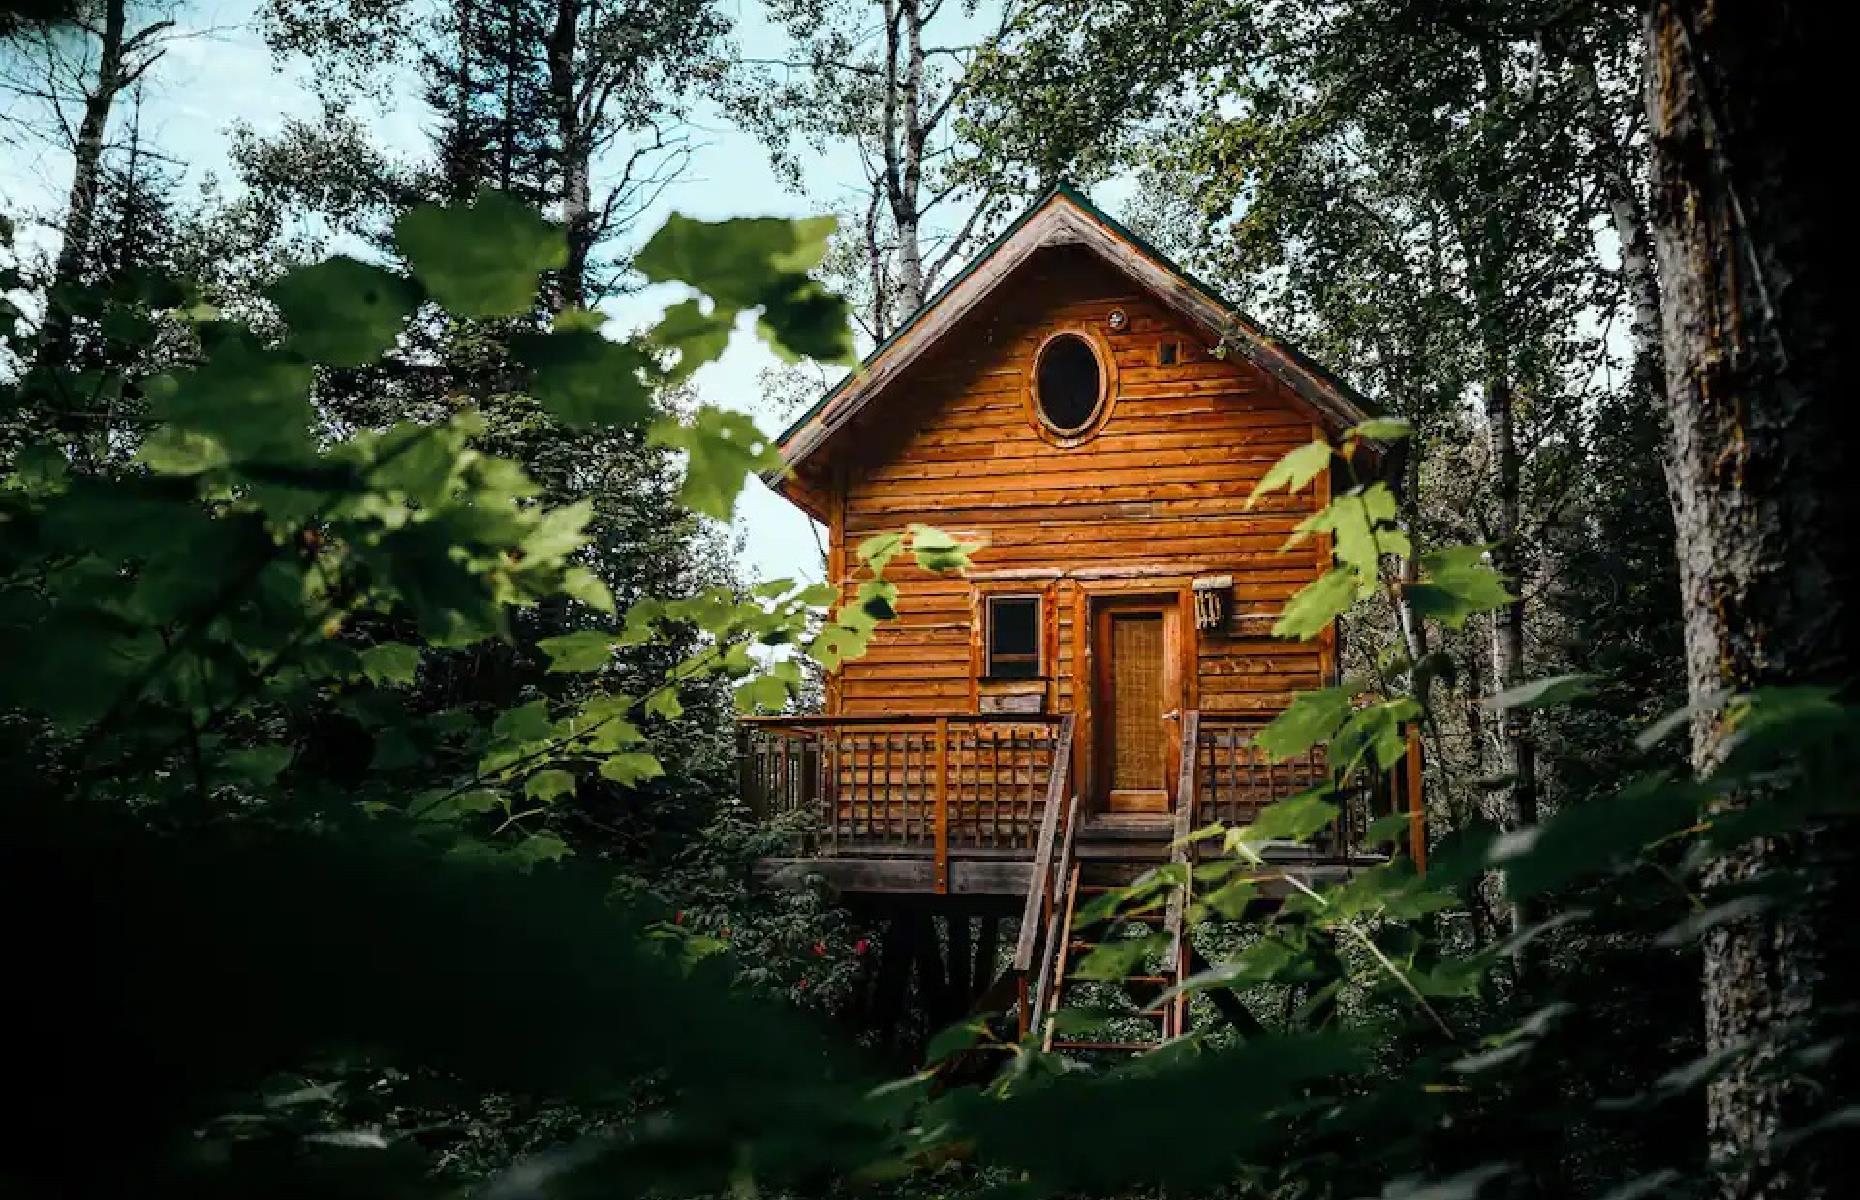 <p>Located east of Québec City and just across the St Lawrence from Maine, Sacré-Coeur is a municipality on Saguenay Fjord, an area known for its remarkable biodiversity. Up to four guests can sleep like the many birds in the area in this <a href="https://www.airbnb.co.uk/rooms/719263?adults=1&category_tag=Tag%3A8186&children=0&infants=0&check_in=2022-10-31&check_out=2022-11-05&federated_search_id=911a7dad-57a4-4cc9-b8ef-86e7668676f6&source_impression_id=p3_1662845942_FSrtcAHXTqxIjmXr">cute and ultra-cozy cabin</a> in the trees. It’s fitted with picture windows so guests can make the most of their bird’s-eye view. The cabin is open year-round, though in winter visitors have to make do without running water. </p>